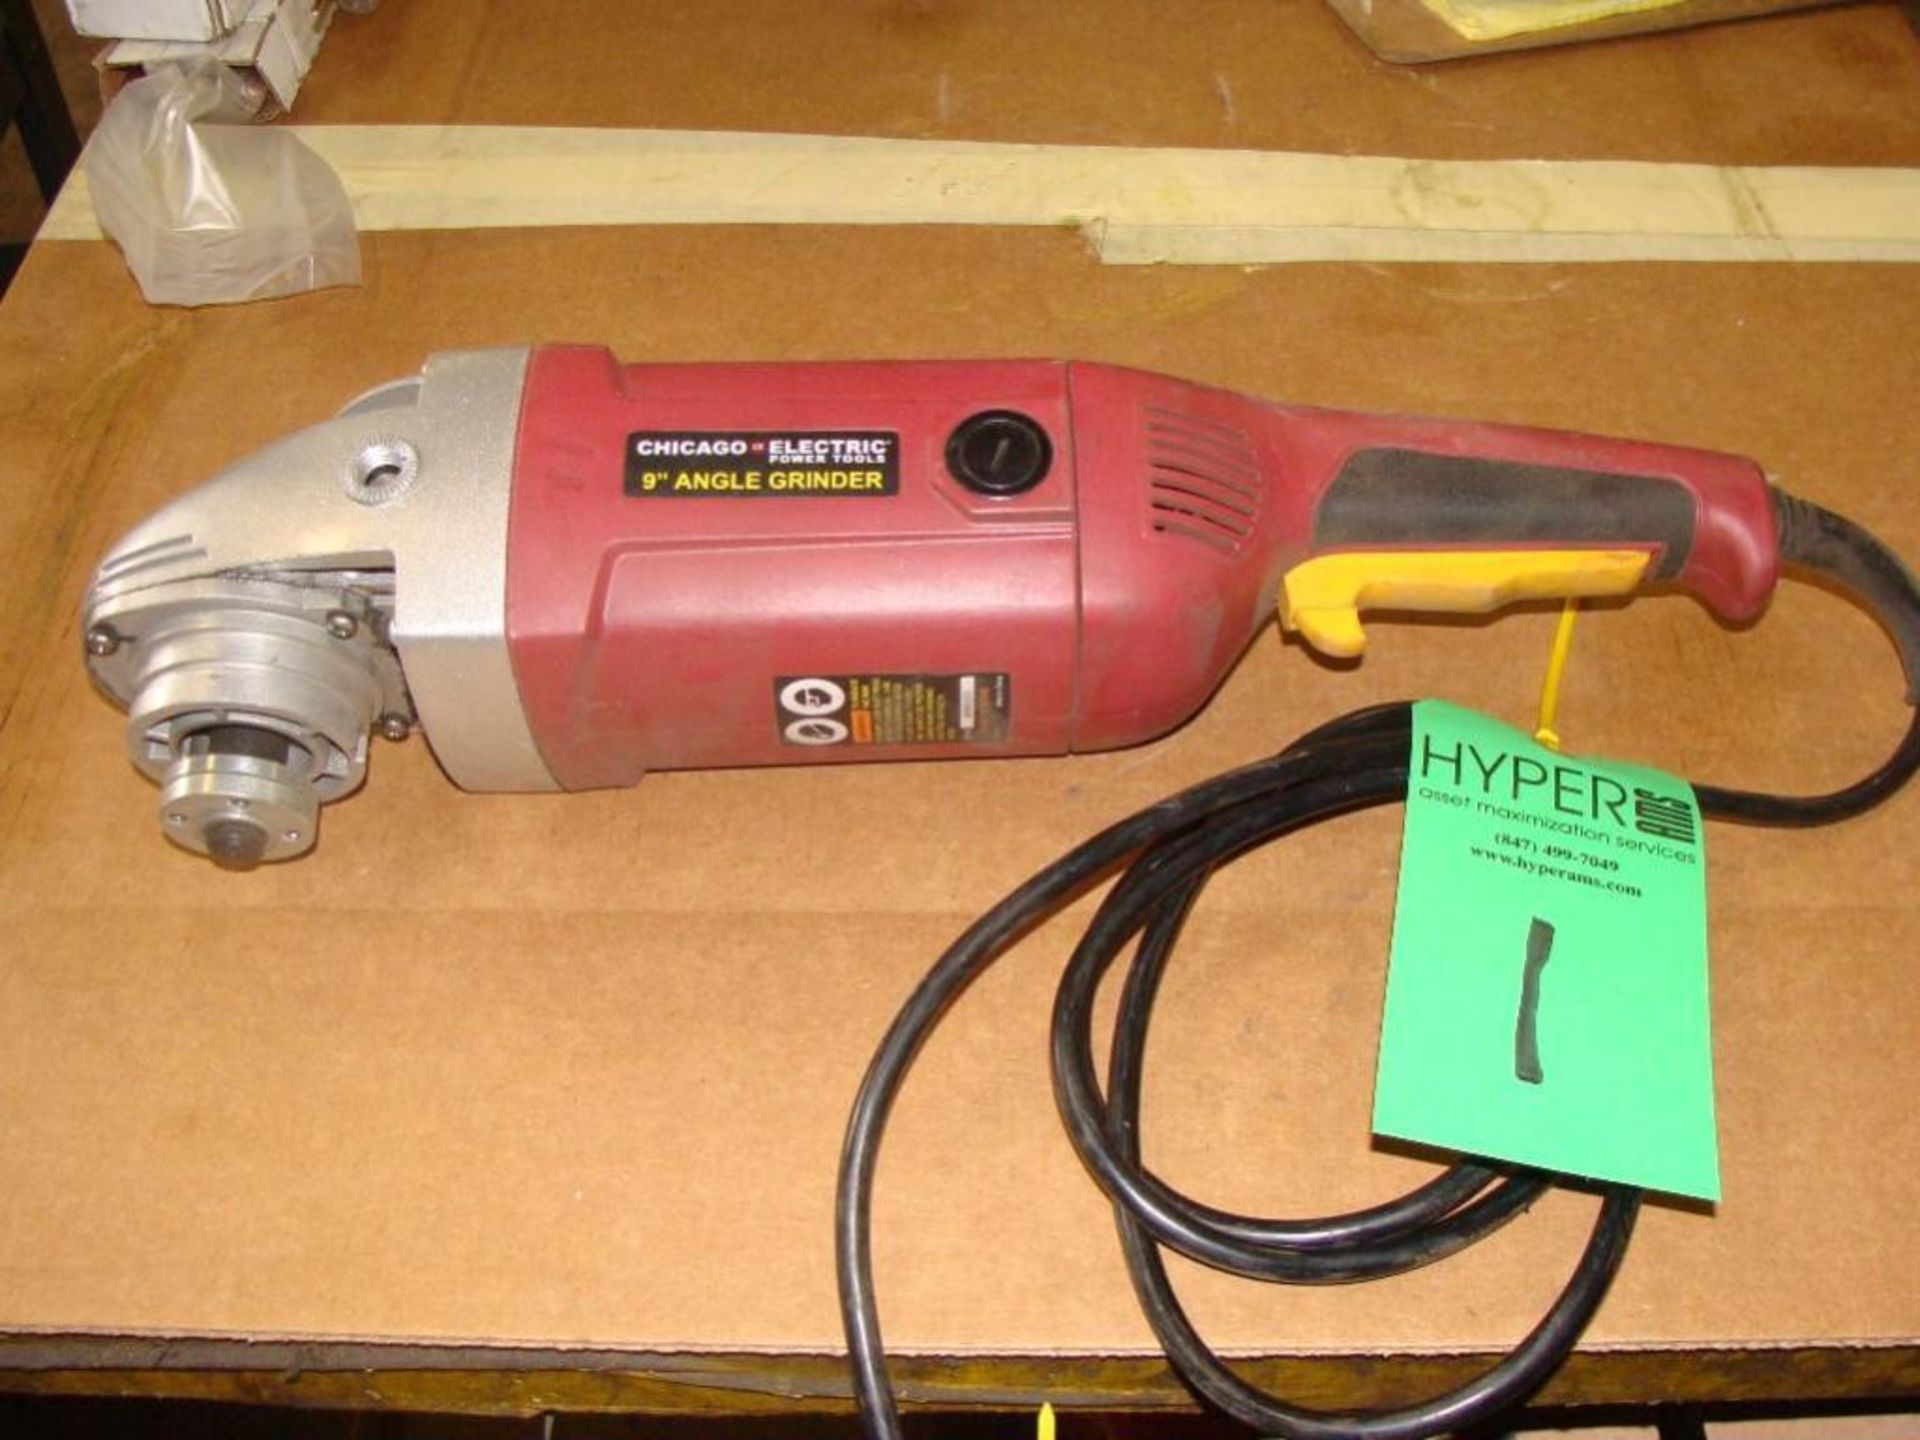 Chicago Electric 9" Angle Grinder